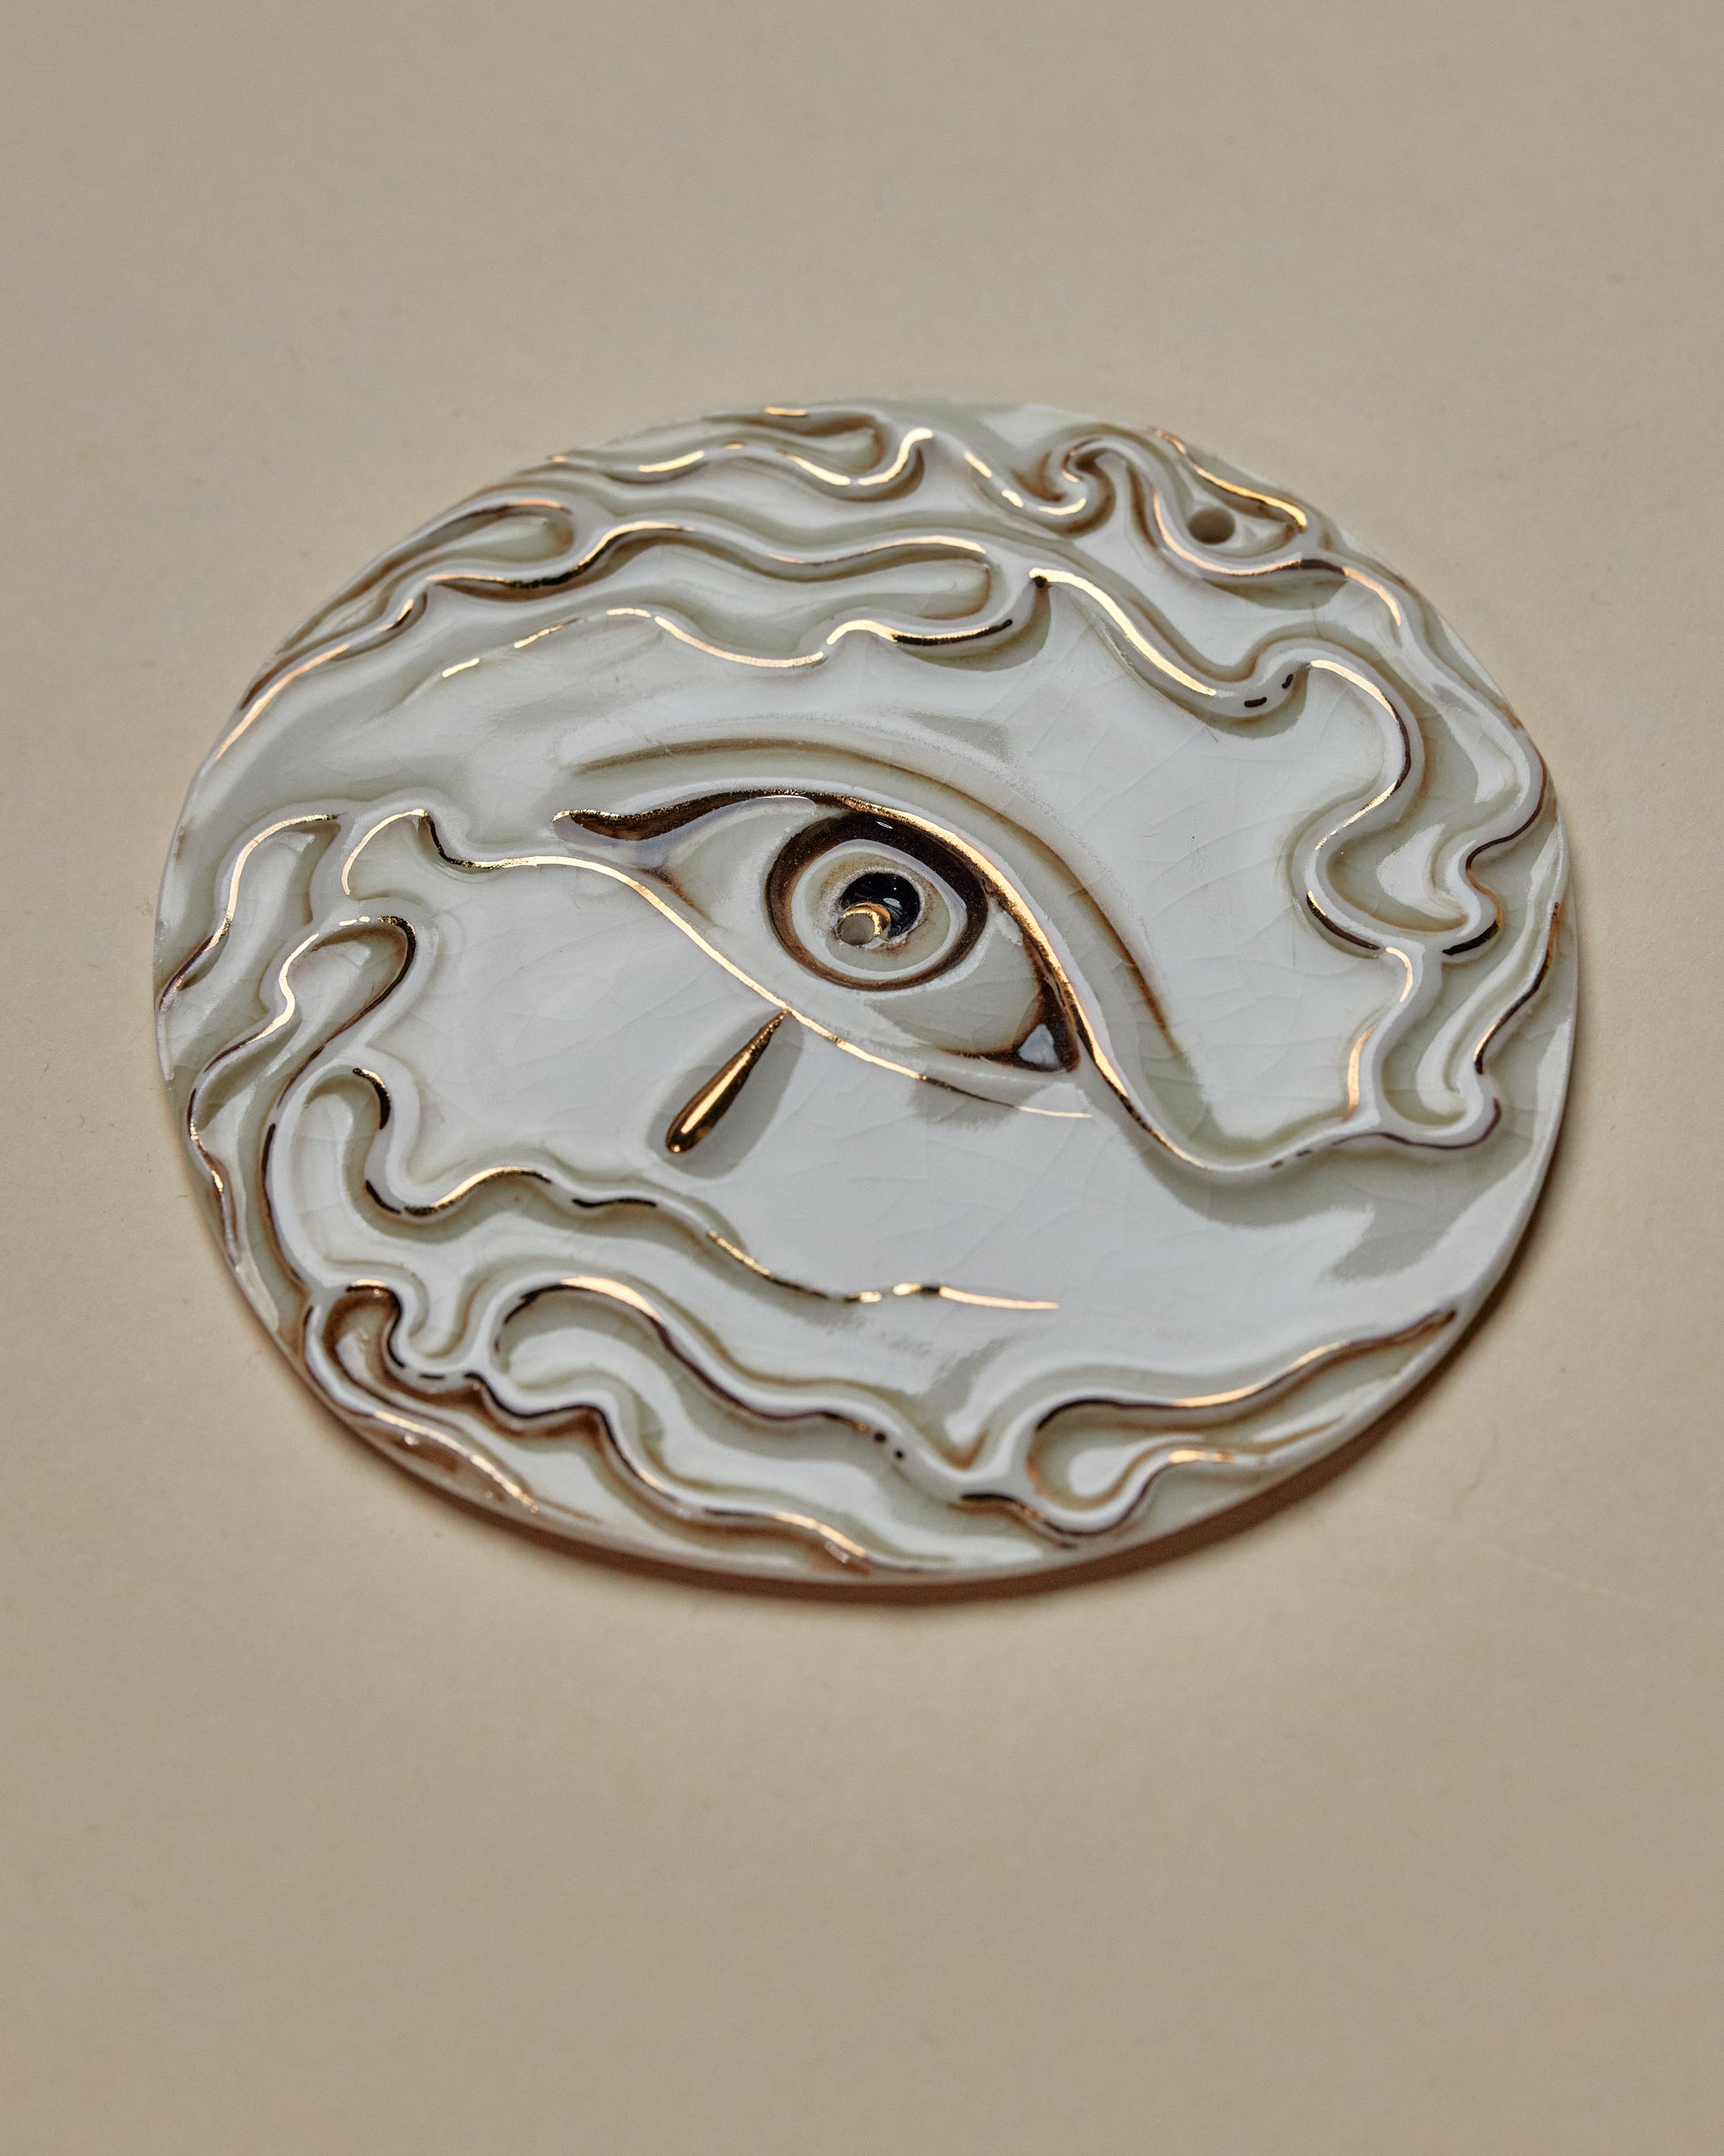 Flaming Eye Incense Holder / Wall Ornament 6 - Hand crafted Porcelain Home Ornament. Circular ornament with Eye and Flame Border.